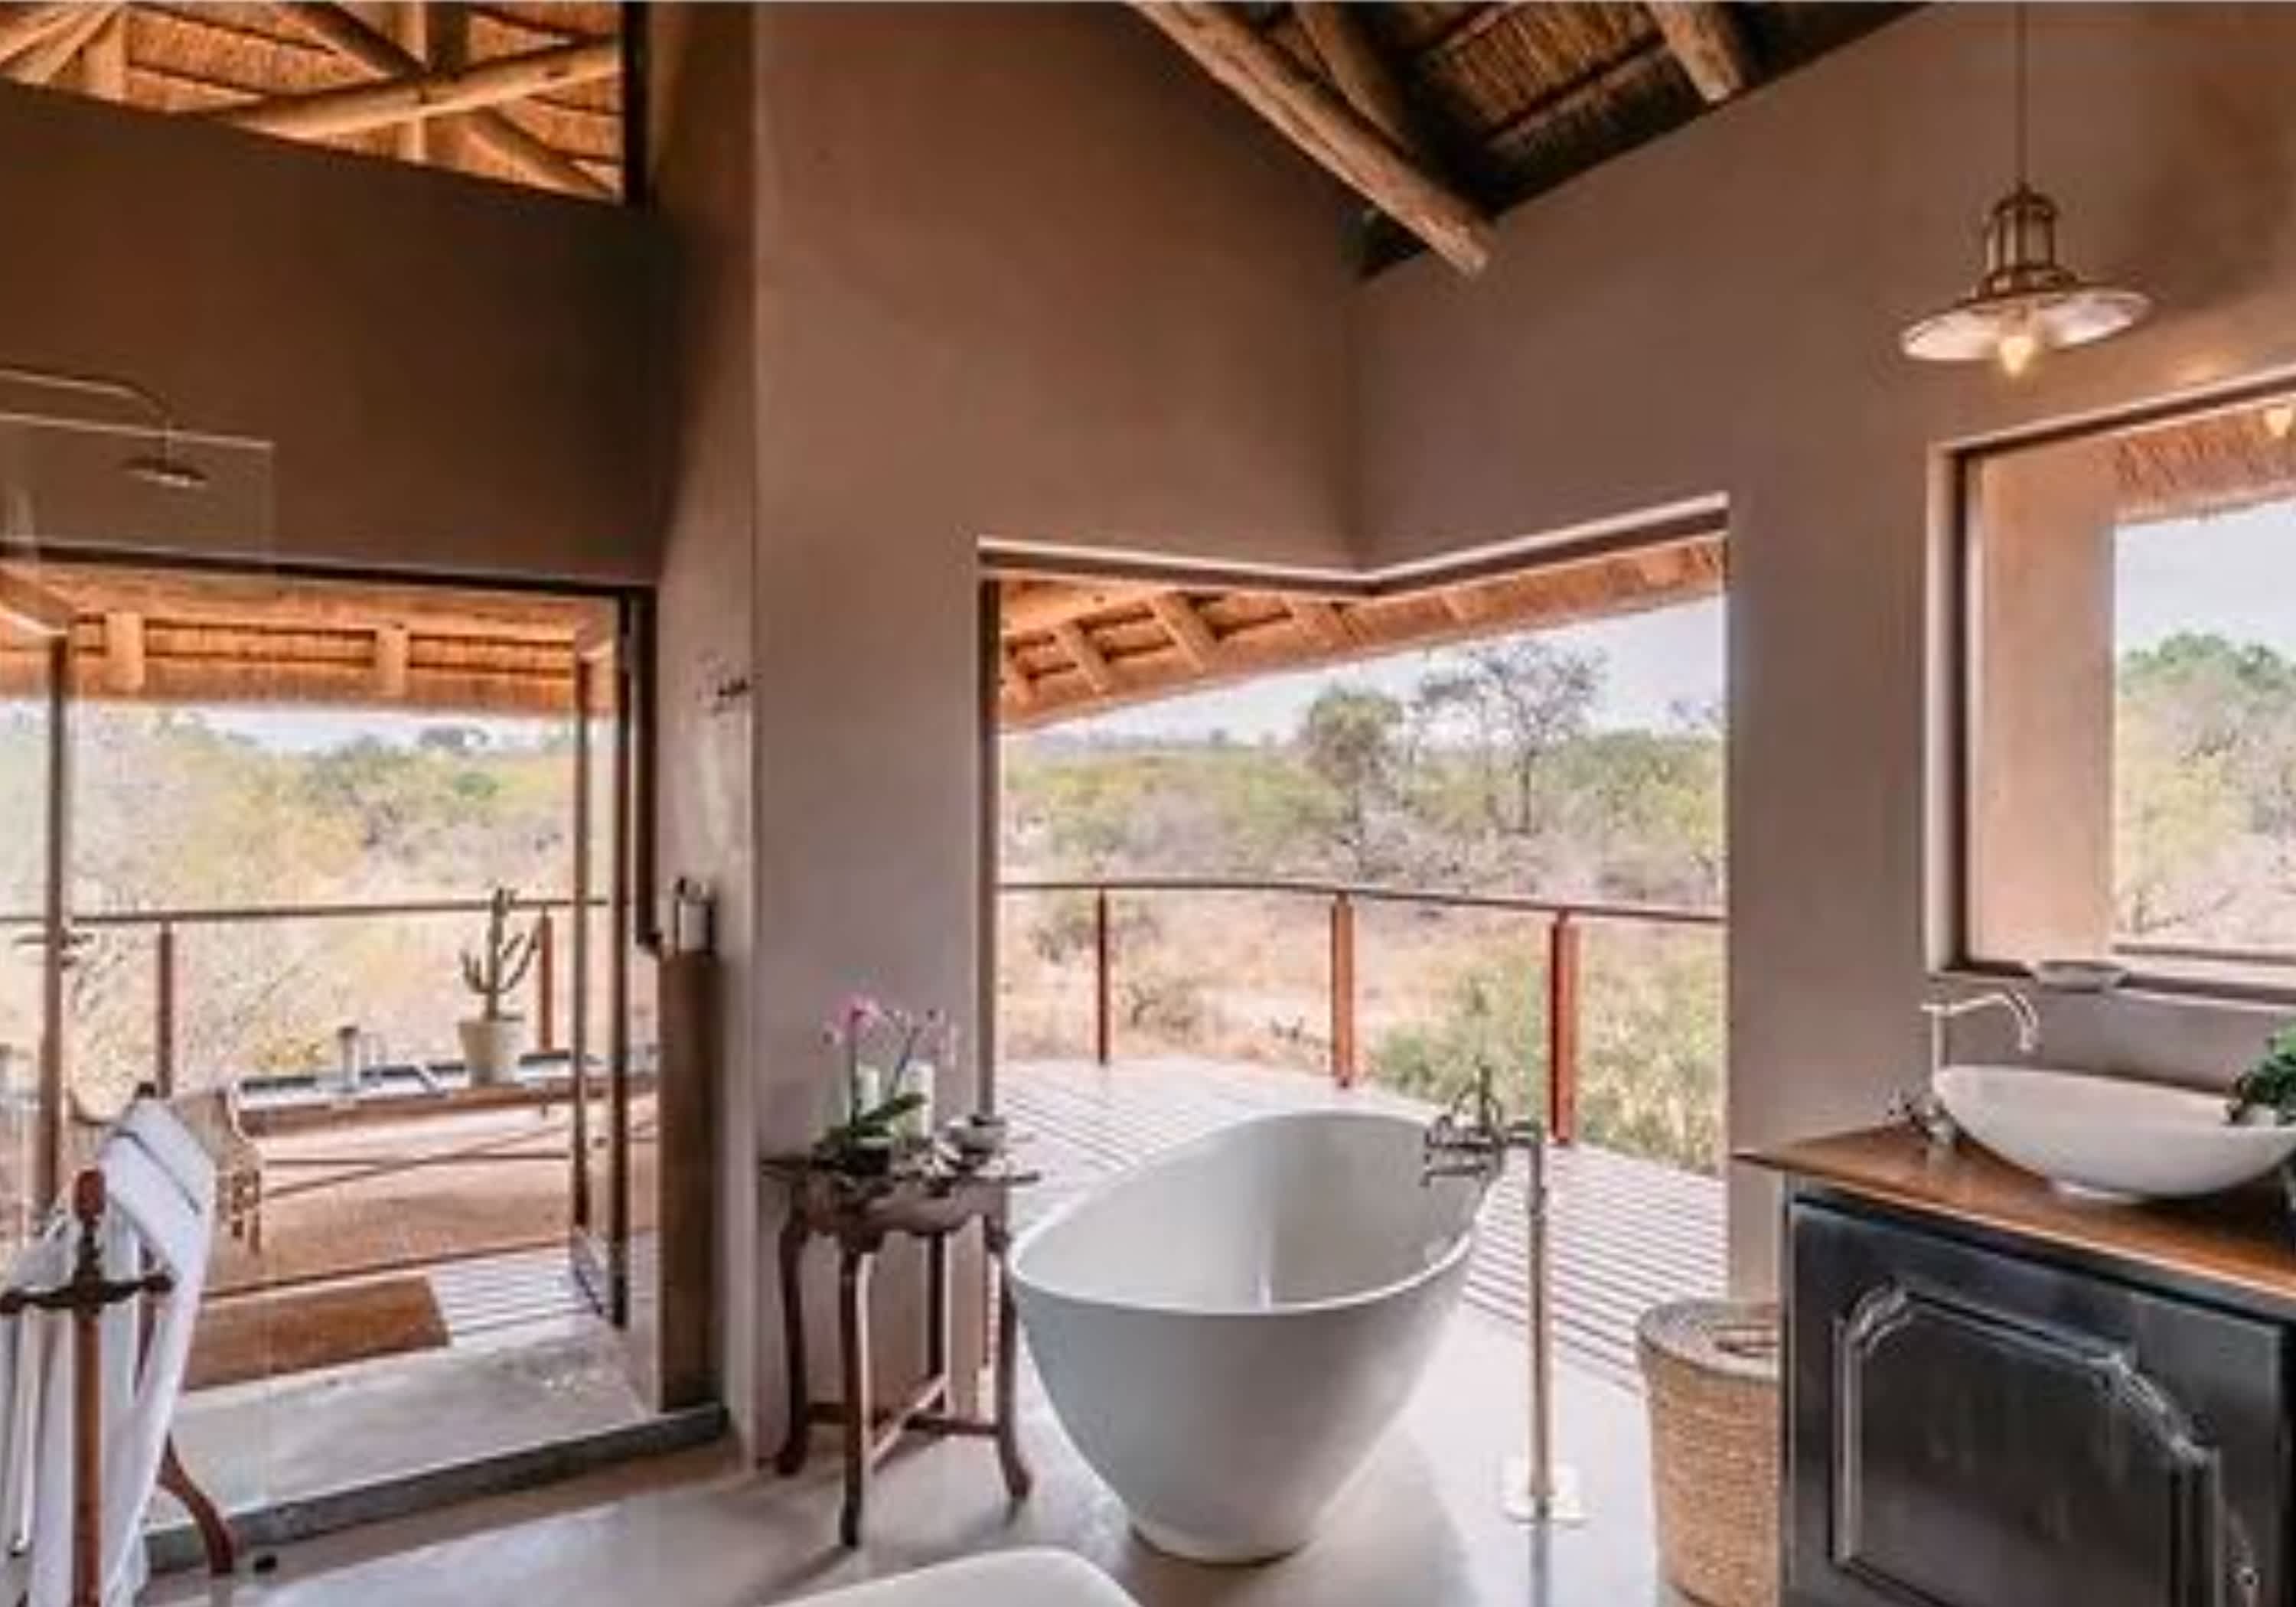 SIVITI TIMBAVATI PLAINS, Greater Kruger National Park - 1 Night Luxury FAMILY Stay for 4 in a Villa - All Meals + Beverages + 2 Game Drives!